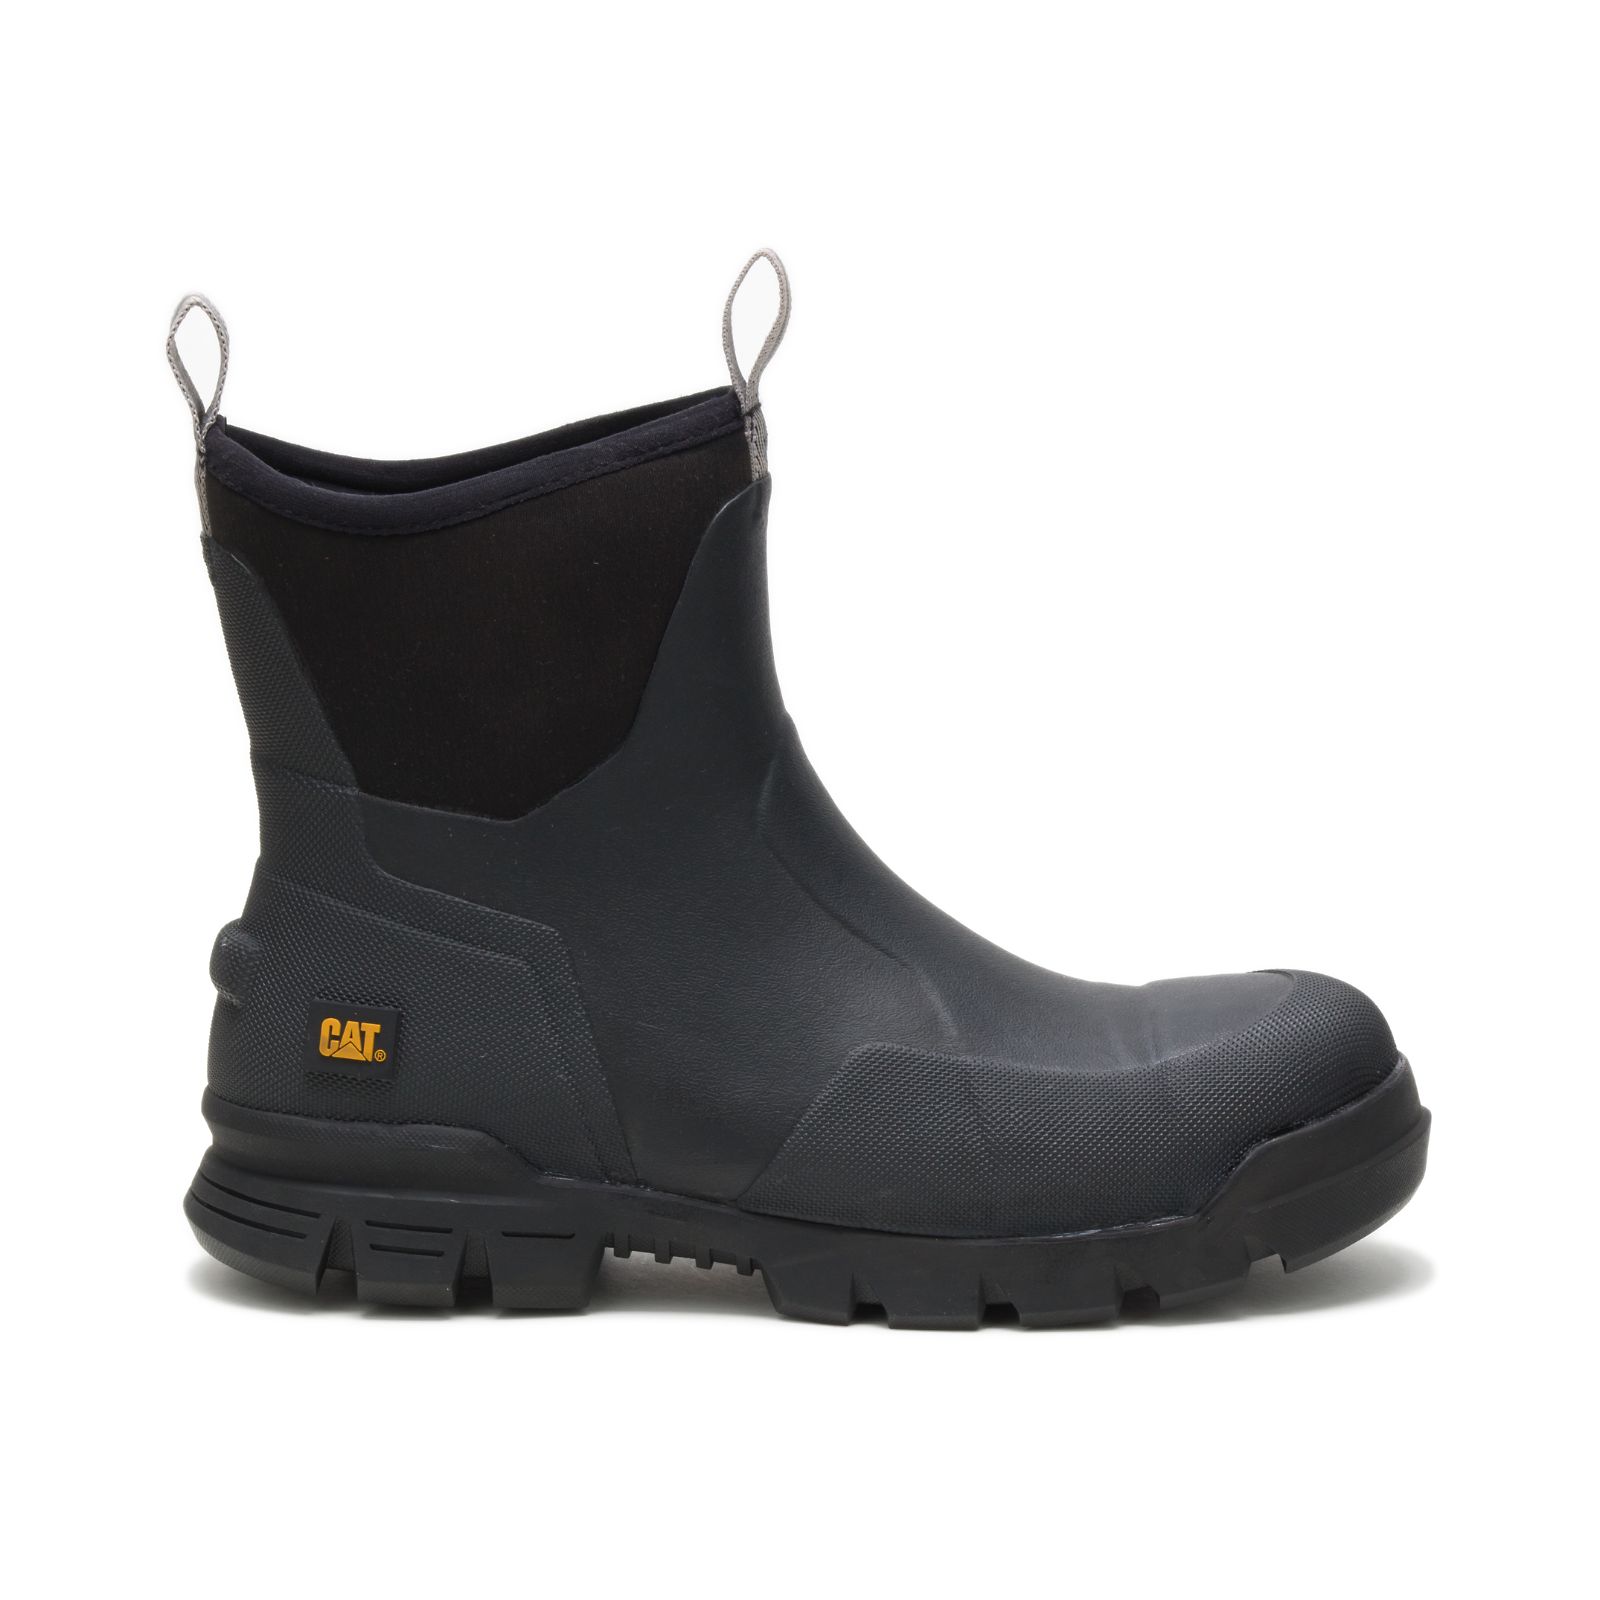 Caterpillar Stormers 6" Philippines - Womens Rubber Boots - Black 18756TOSC